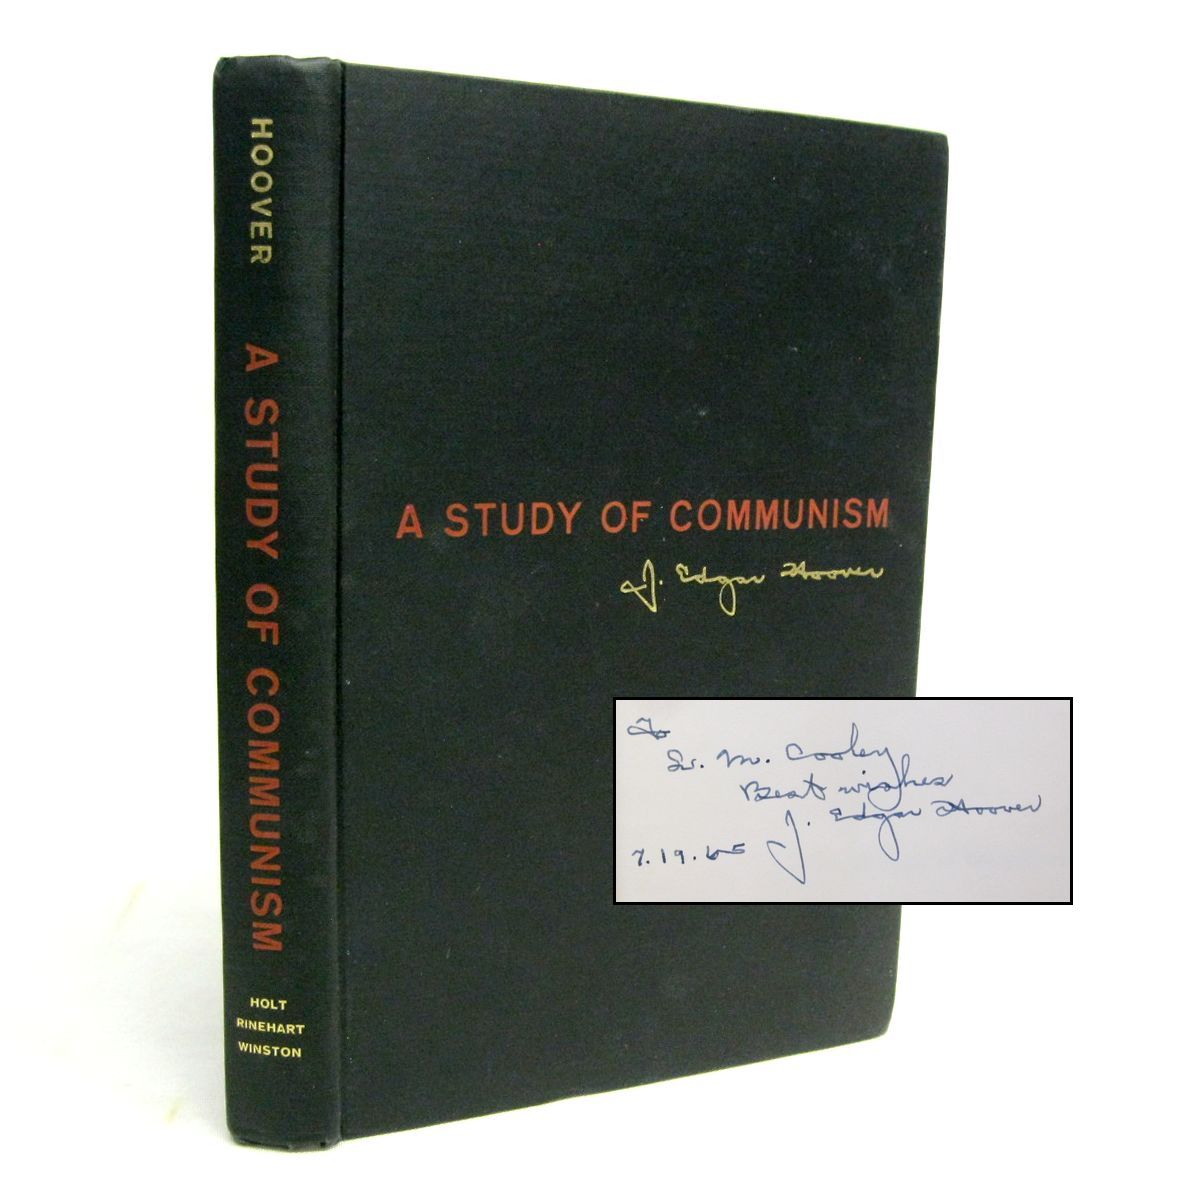 A Study of Communism by J. Edgar Hoover